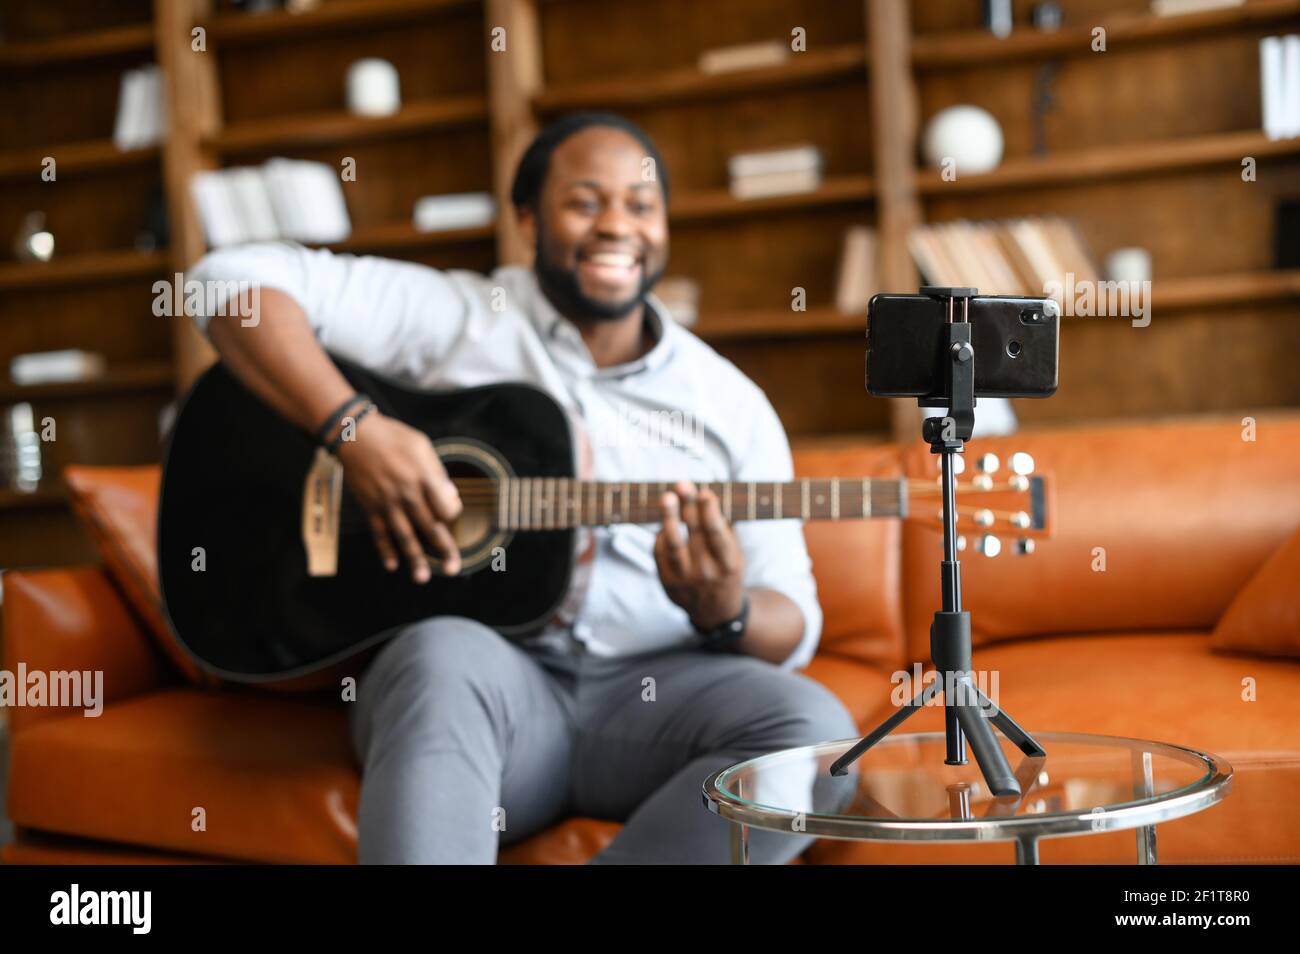 Selective focus at the smartphone on the tripod in front of African guy playing guitar, a vlogger making a content, records himself on the smartphone, performing online Stock Photo